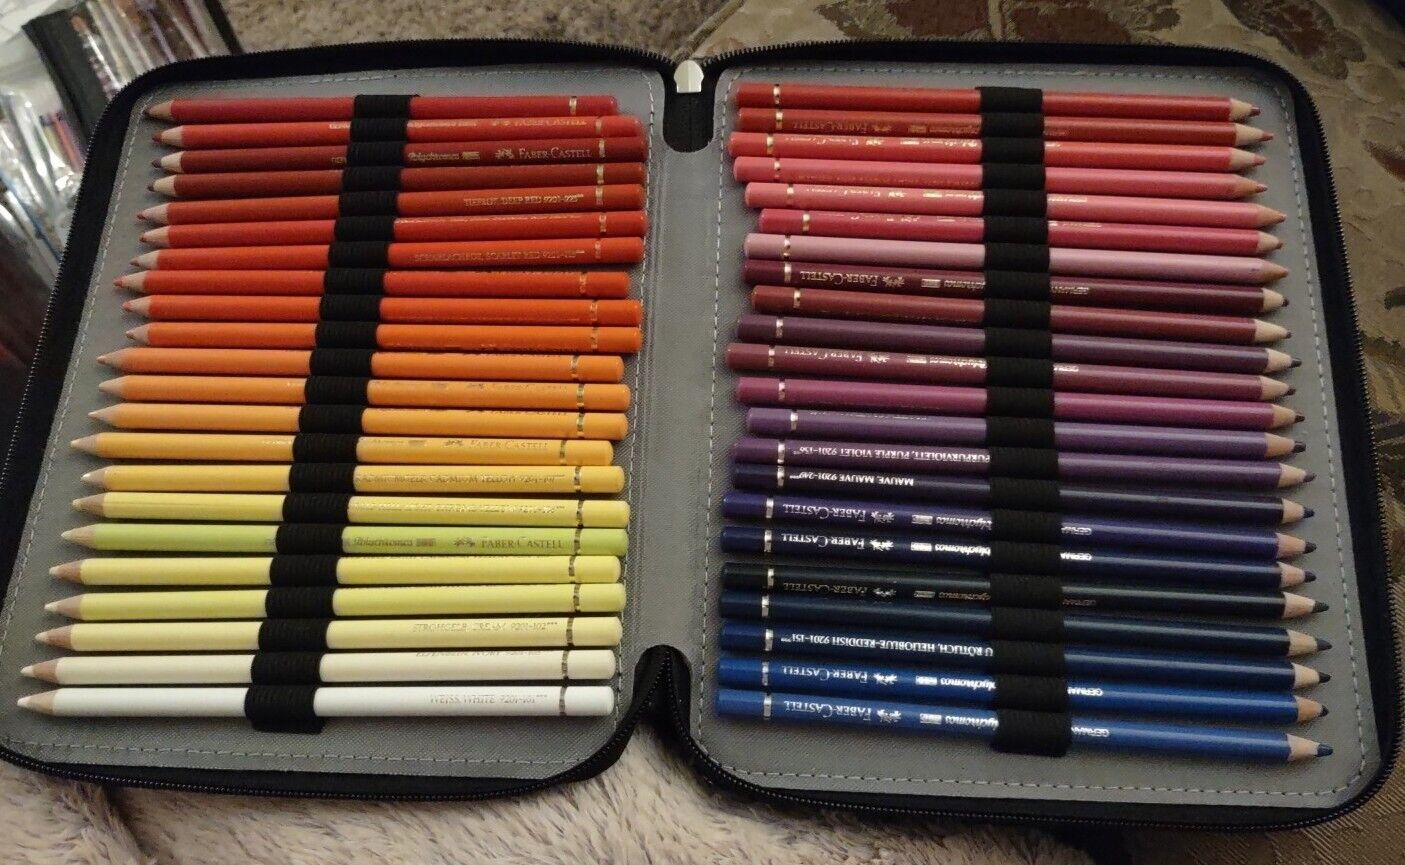 120 Faber-Castell Polychromos Artists Colored Pencils In a Premium Leather Case